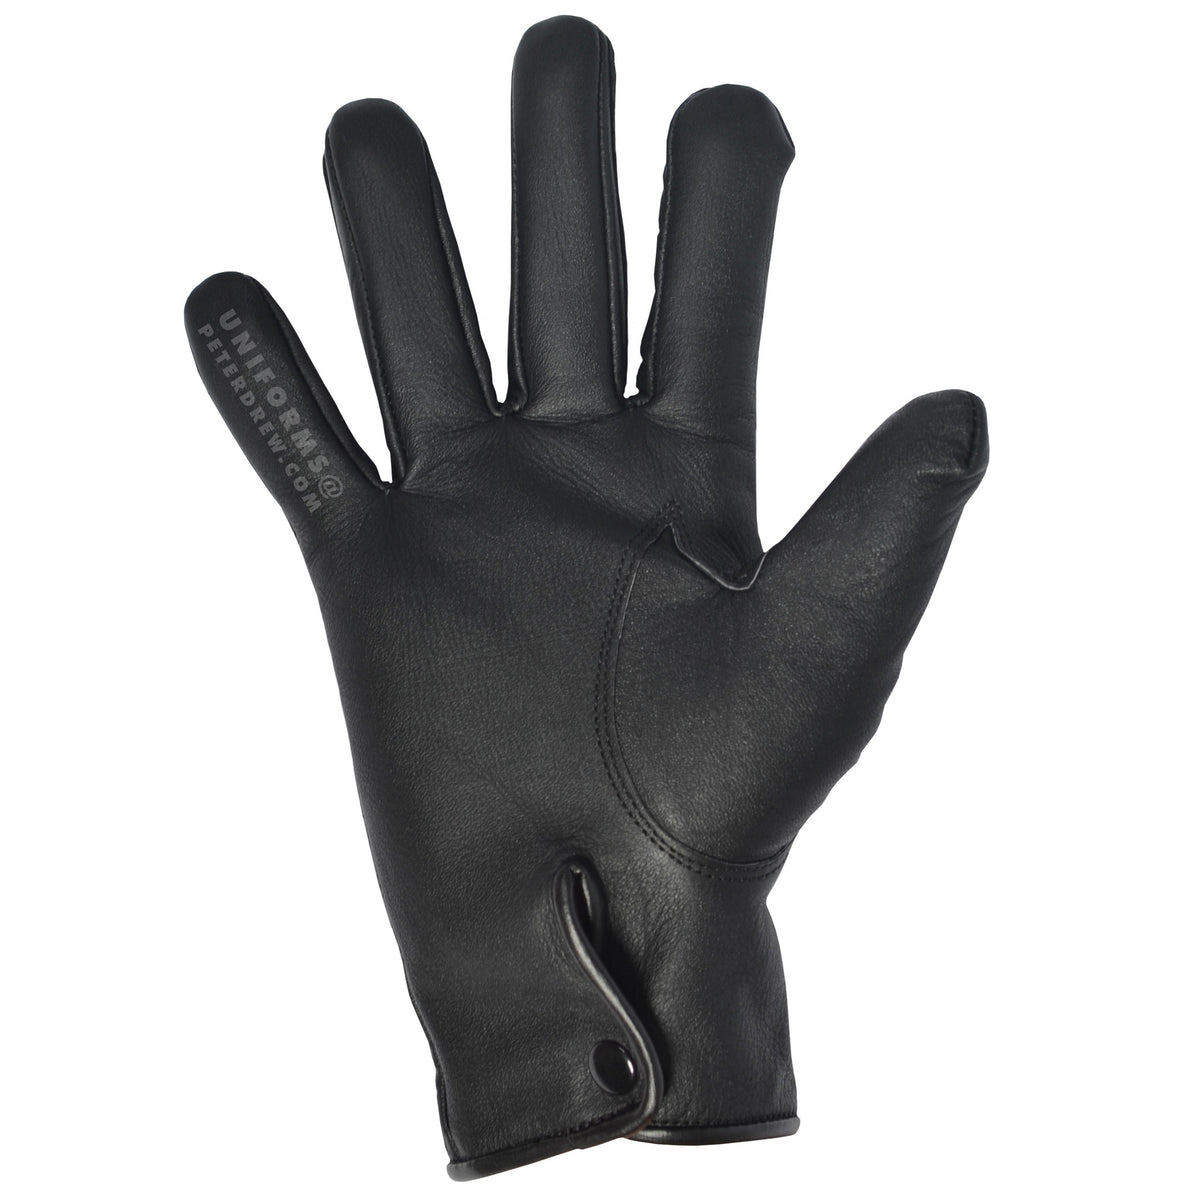 Leather Gloves - peterdrew.com
 - 2